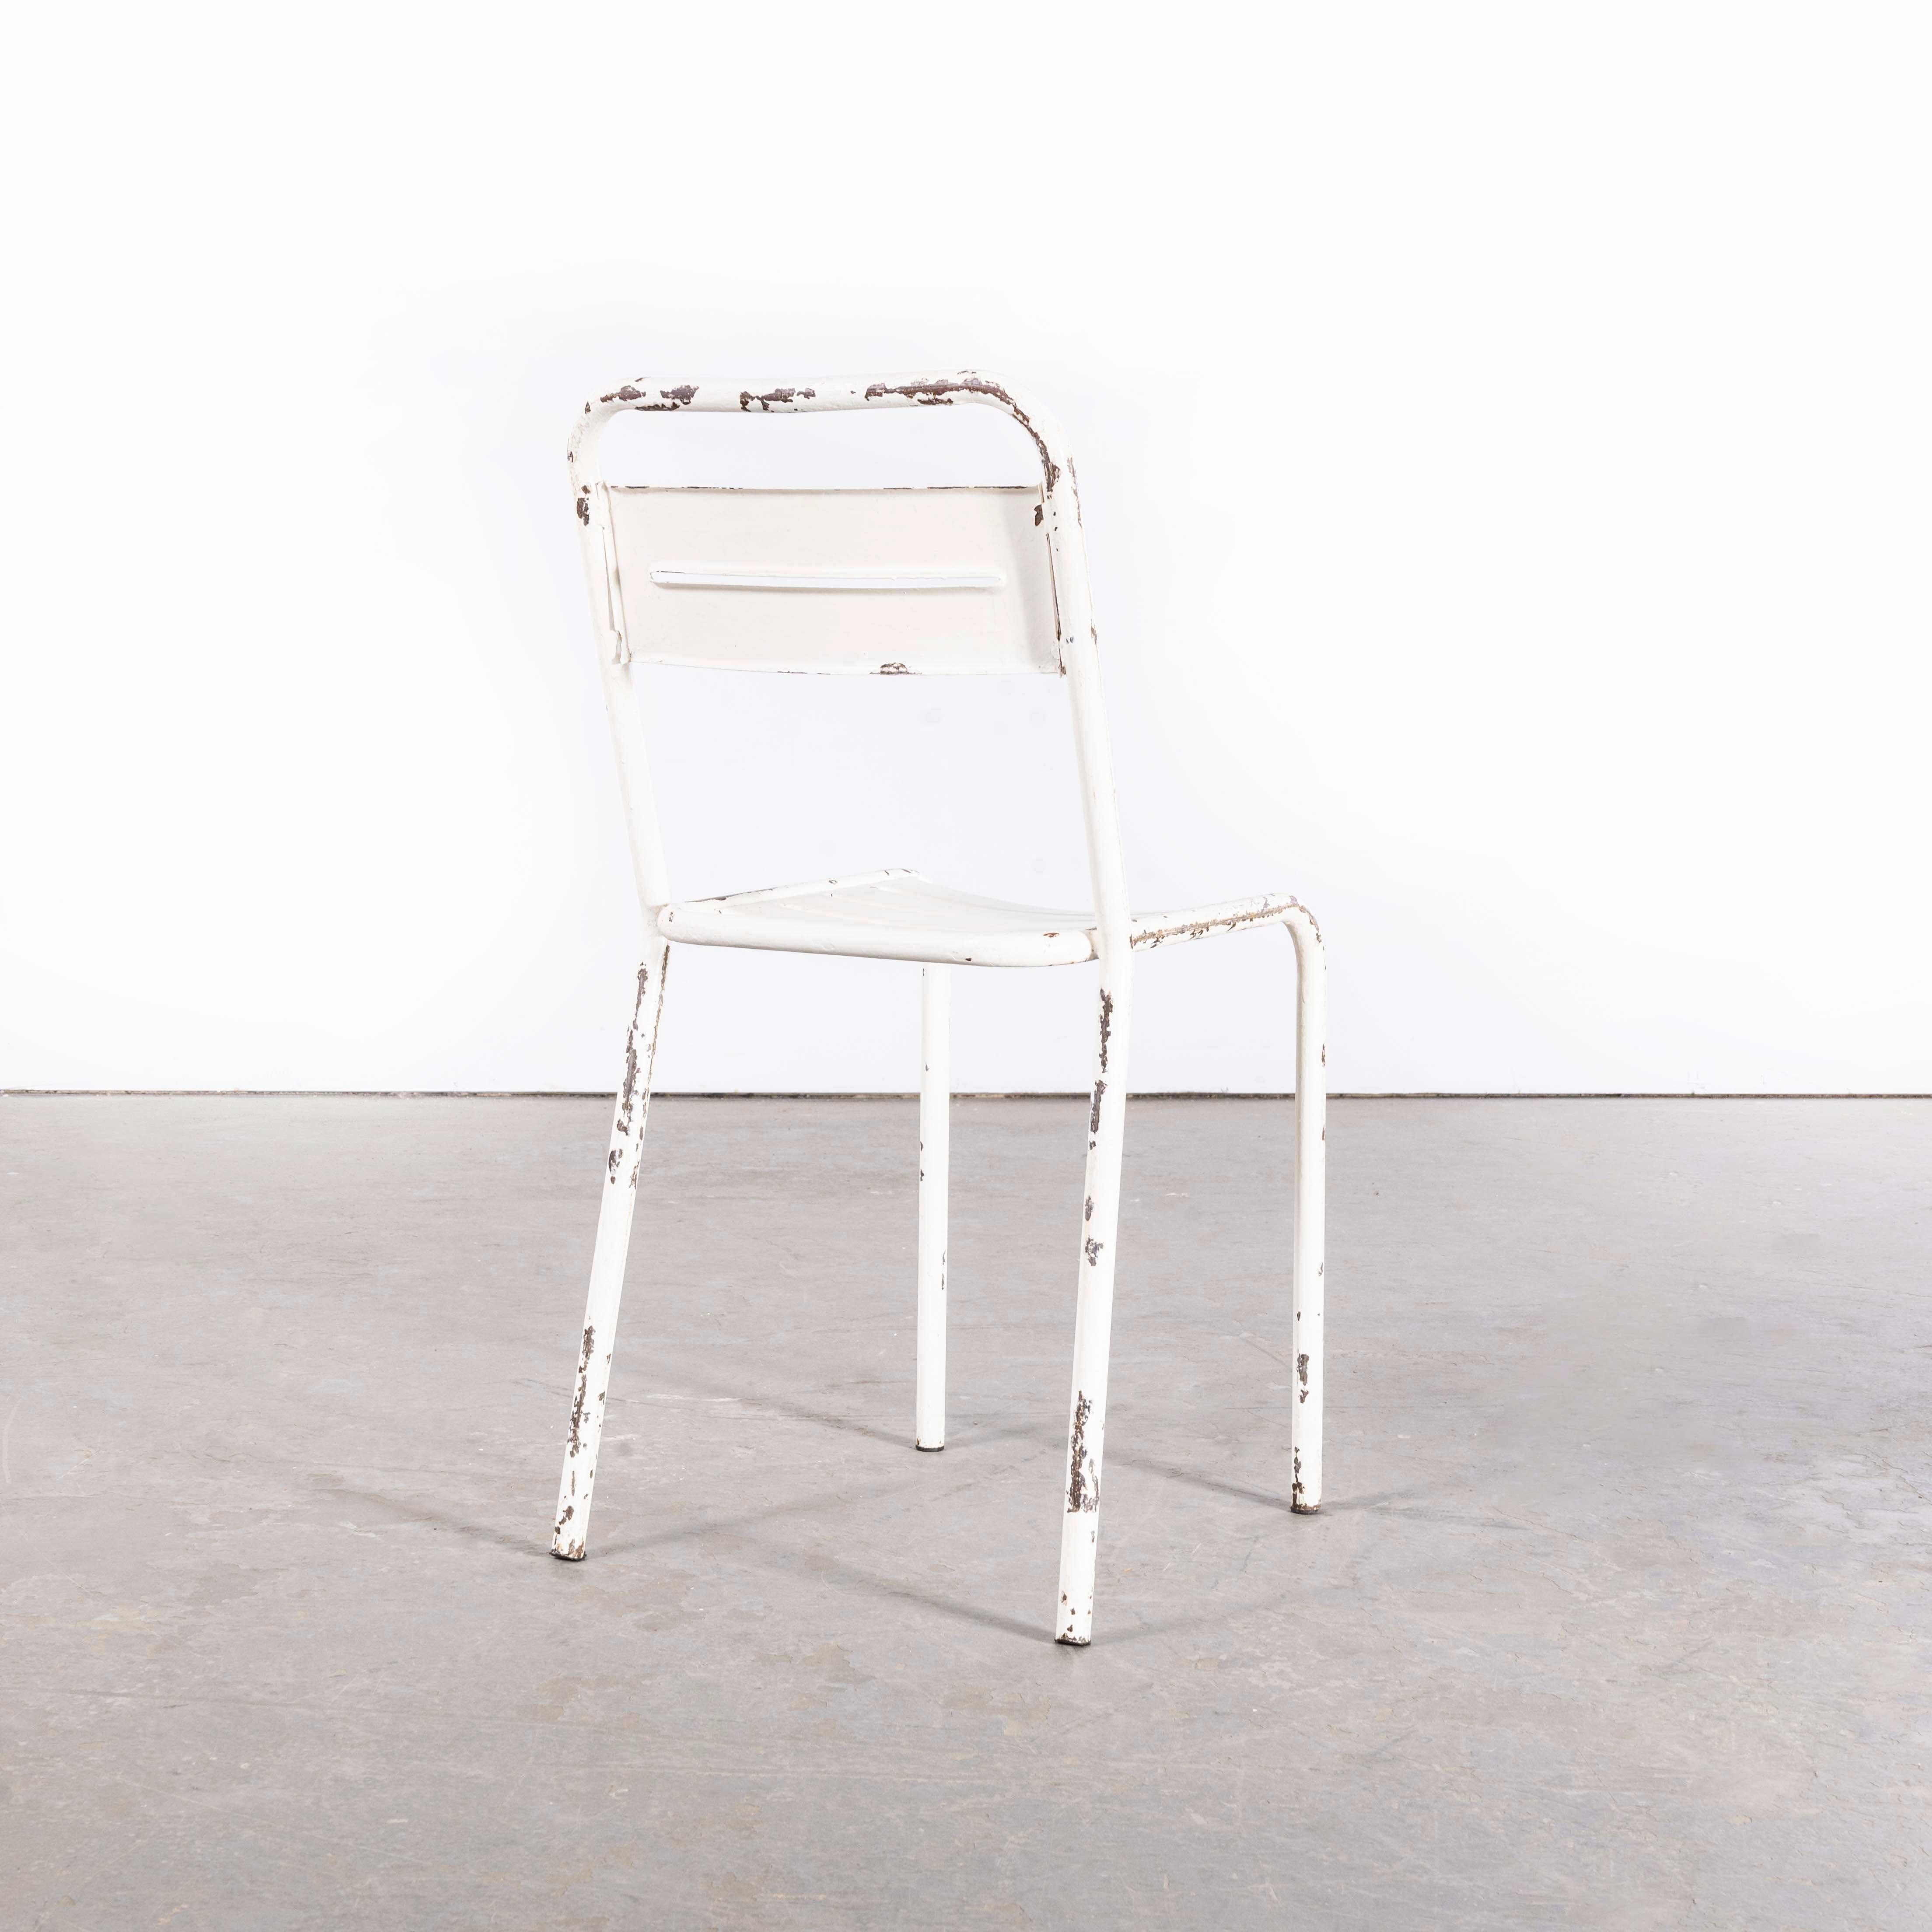 1950’s French White Metal Stacking Outdoor Chairs – Set Of Four

1950’s French White Metal Stacking Outdoor Chairs – Set Of Four. Reminiscent of Tolix but not made by Tolix, this style of chair was industrially produced in the 1950’s by various